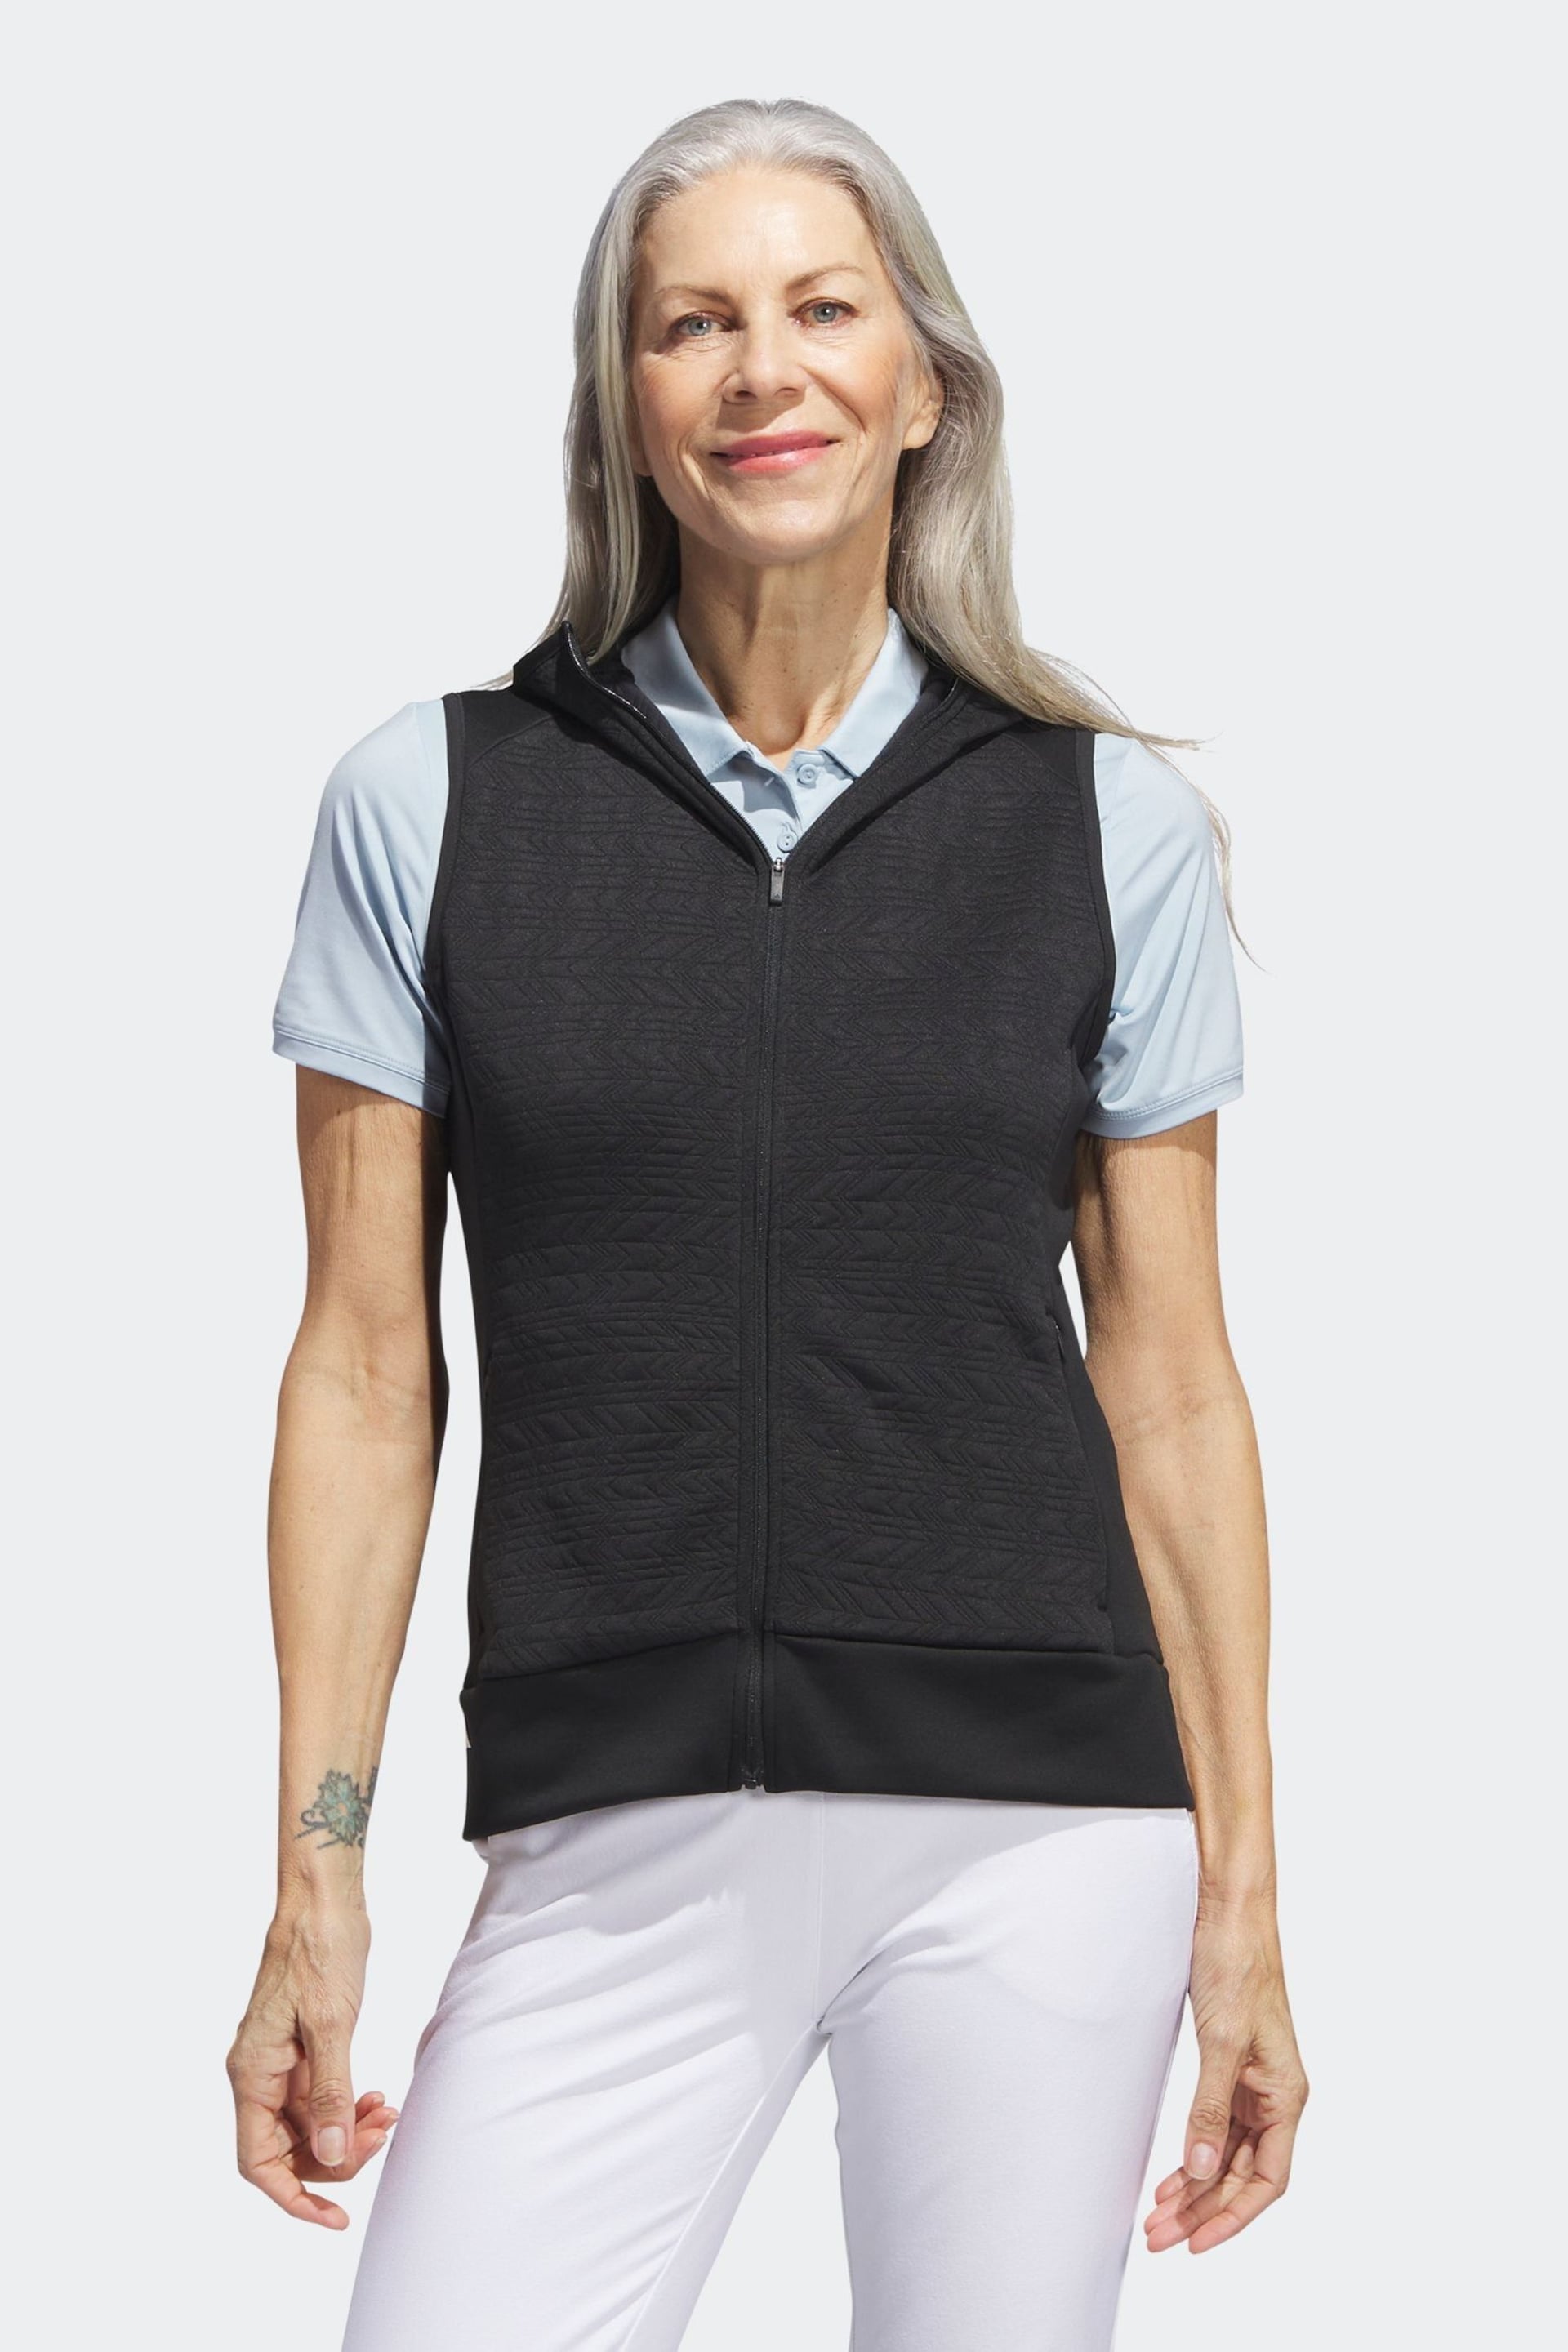 adidas Golf Black COLD.RDY Full-Zip Vest - Image 1 of 7